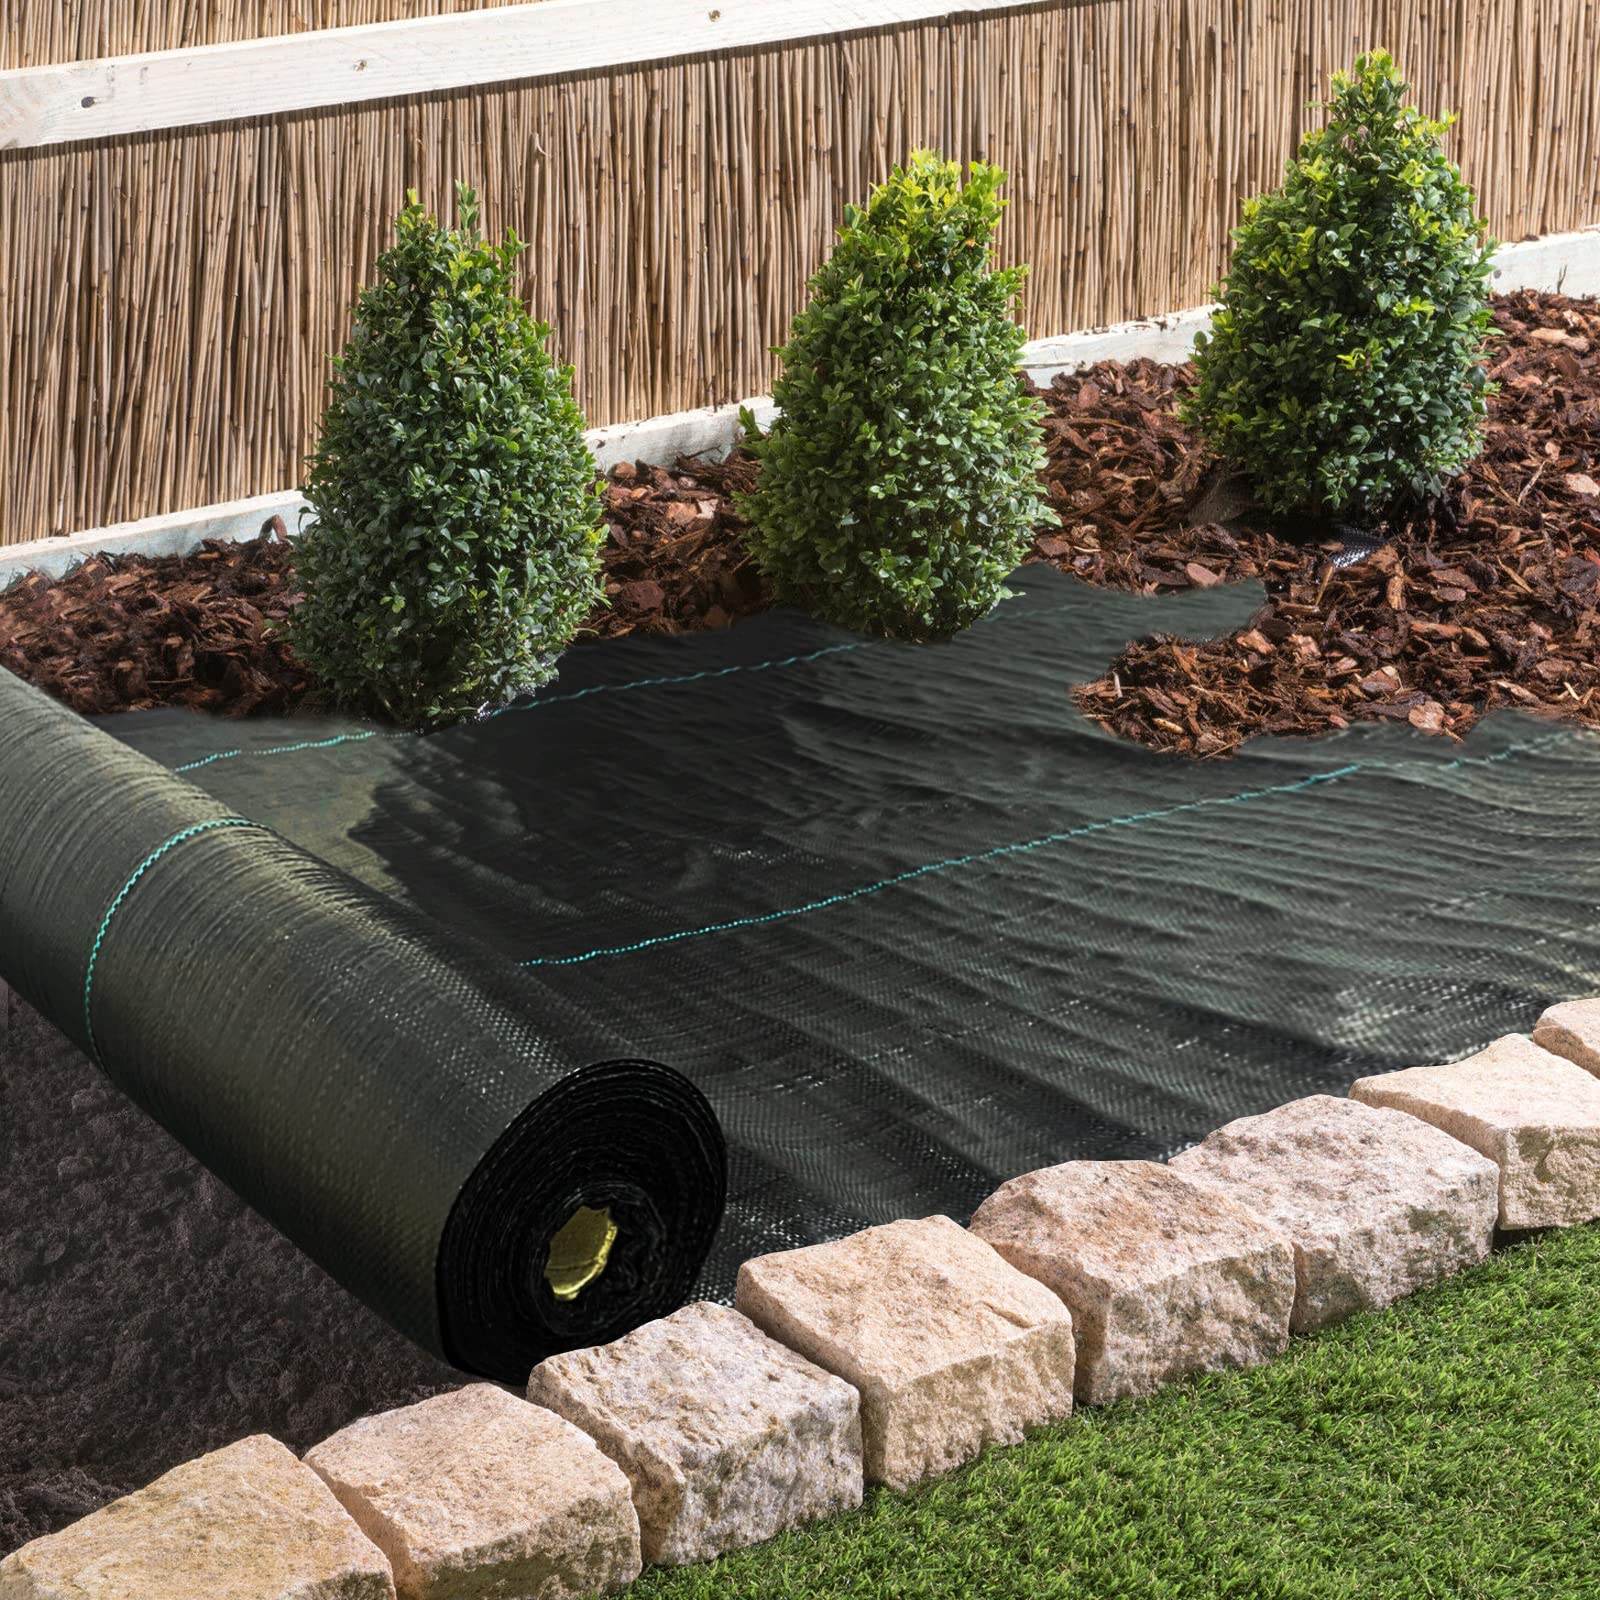 LGJIAOJIAO 6.5ftx330ft Weed Barrier Landscape Fabric Heavy Duty Weed Block Gardening Ground Cover Mat Weed Control Garden